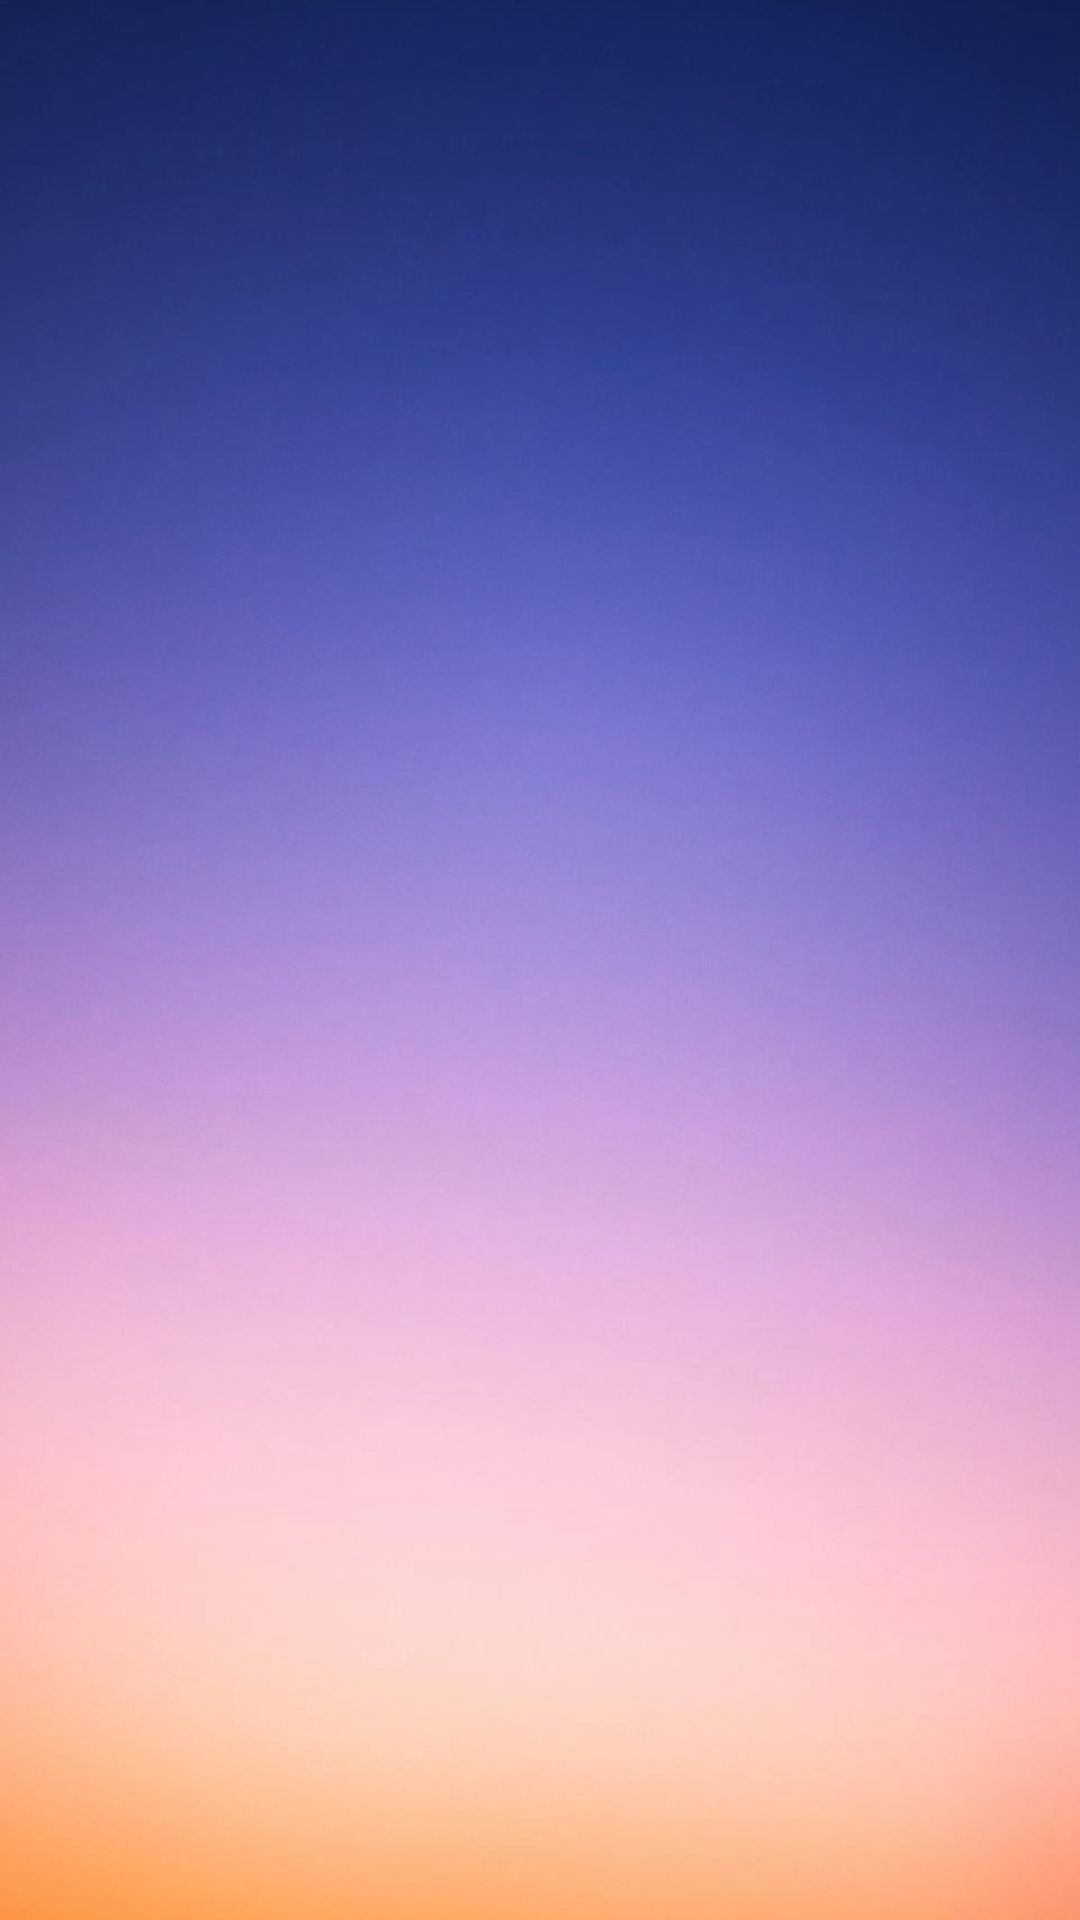 Color Fade iPhone 6 Wallpaper Free Color Fade iPhone 6 Background